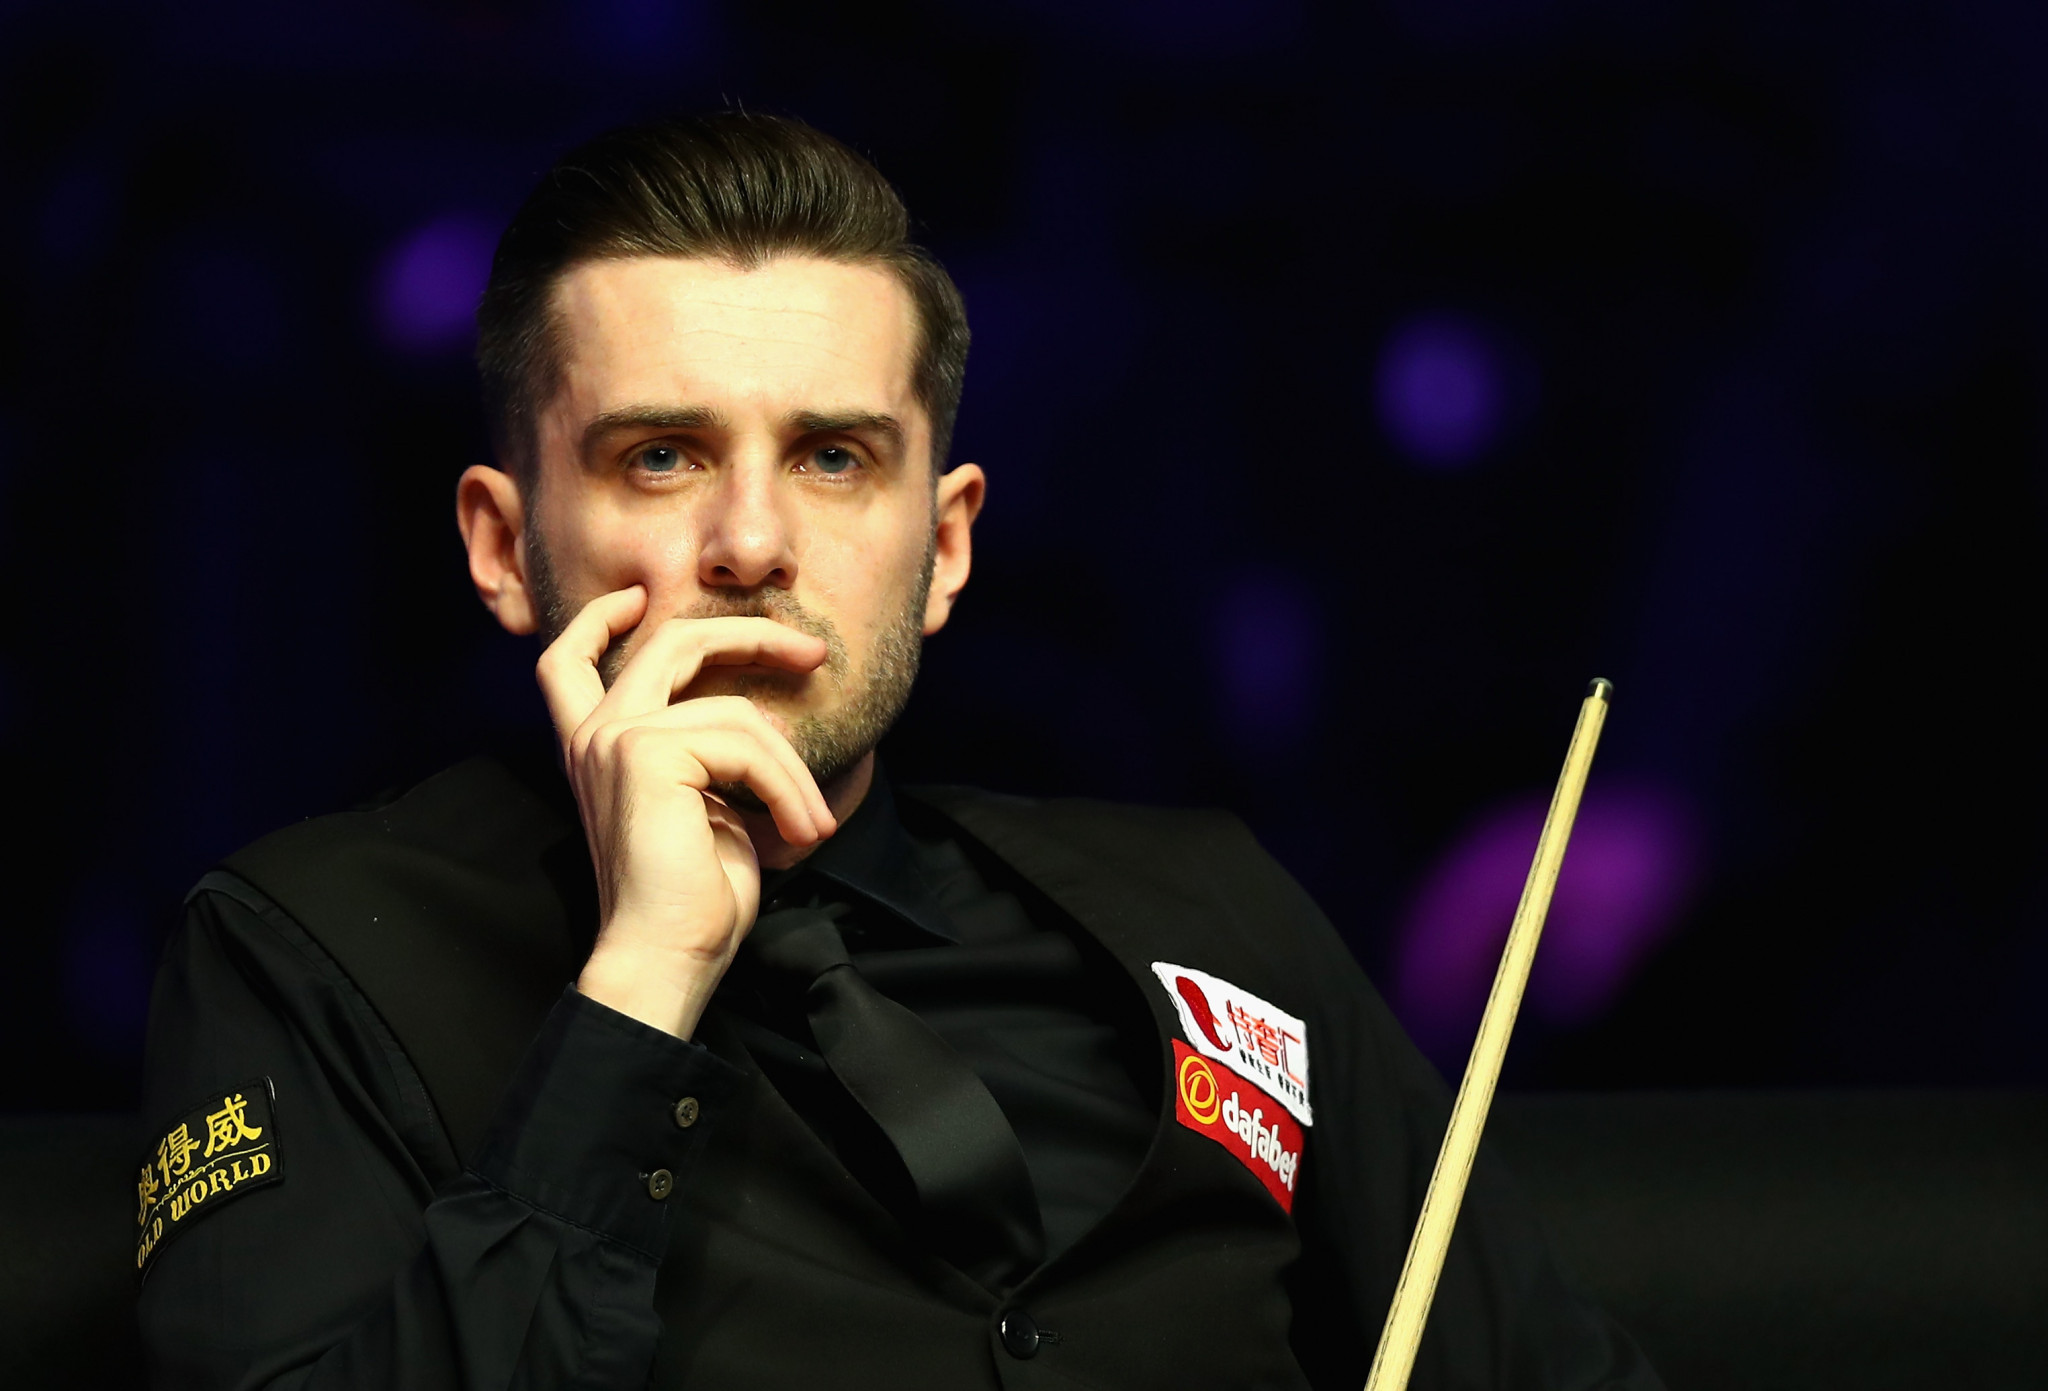 Line-up confirmed for World Snooker Championship in Sheffield